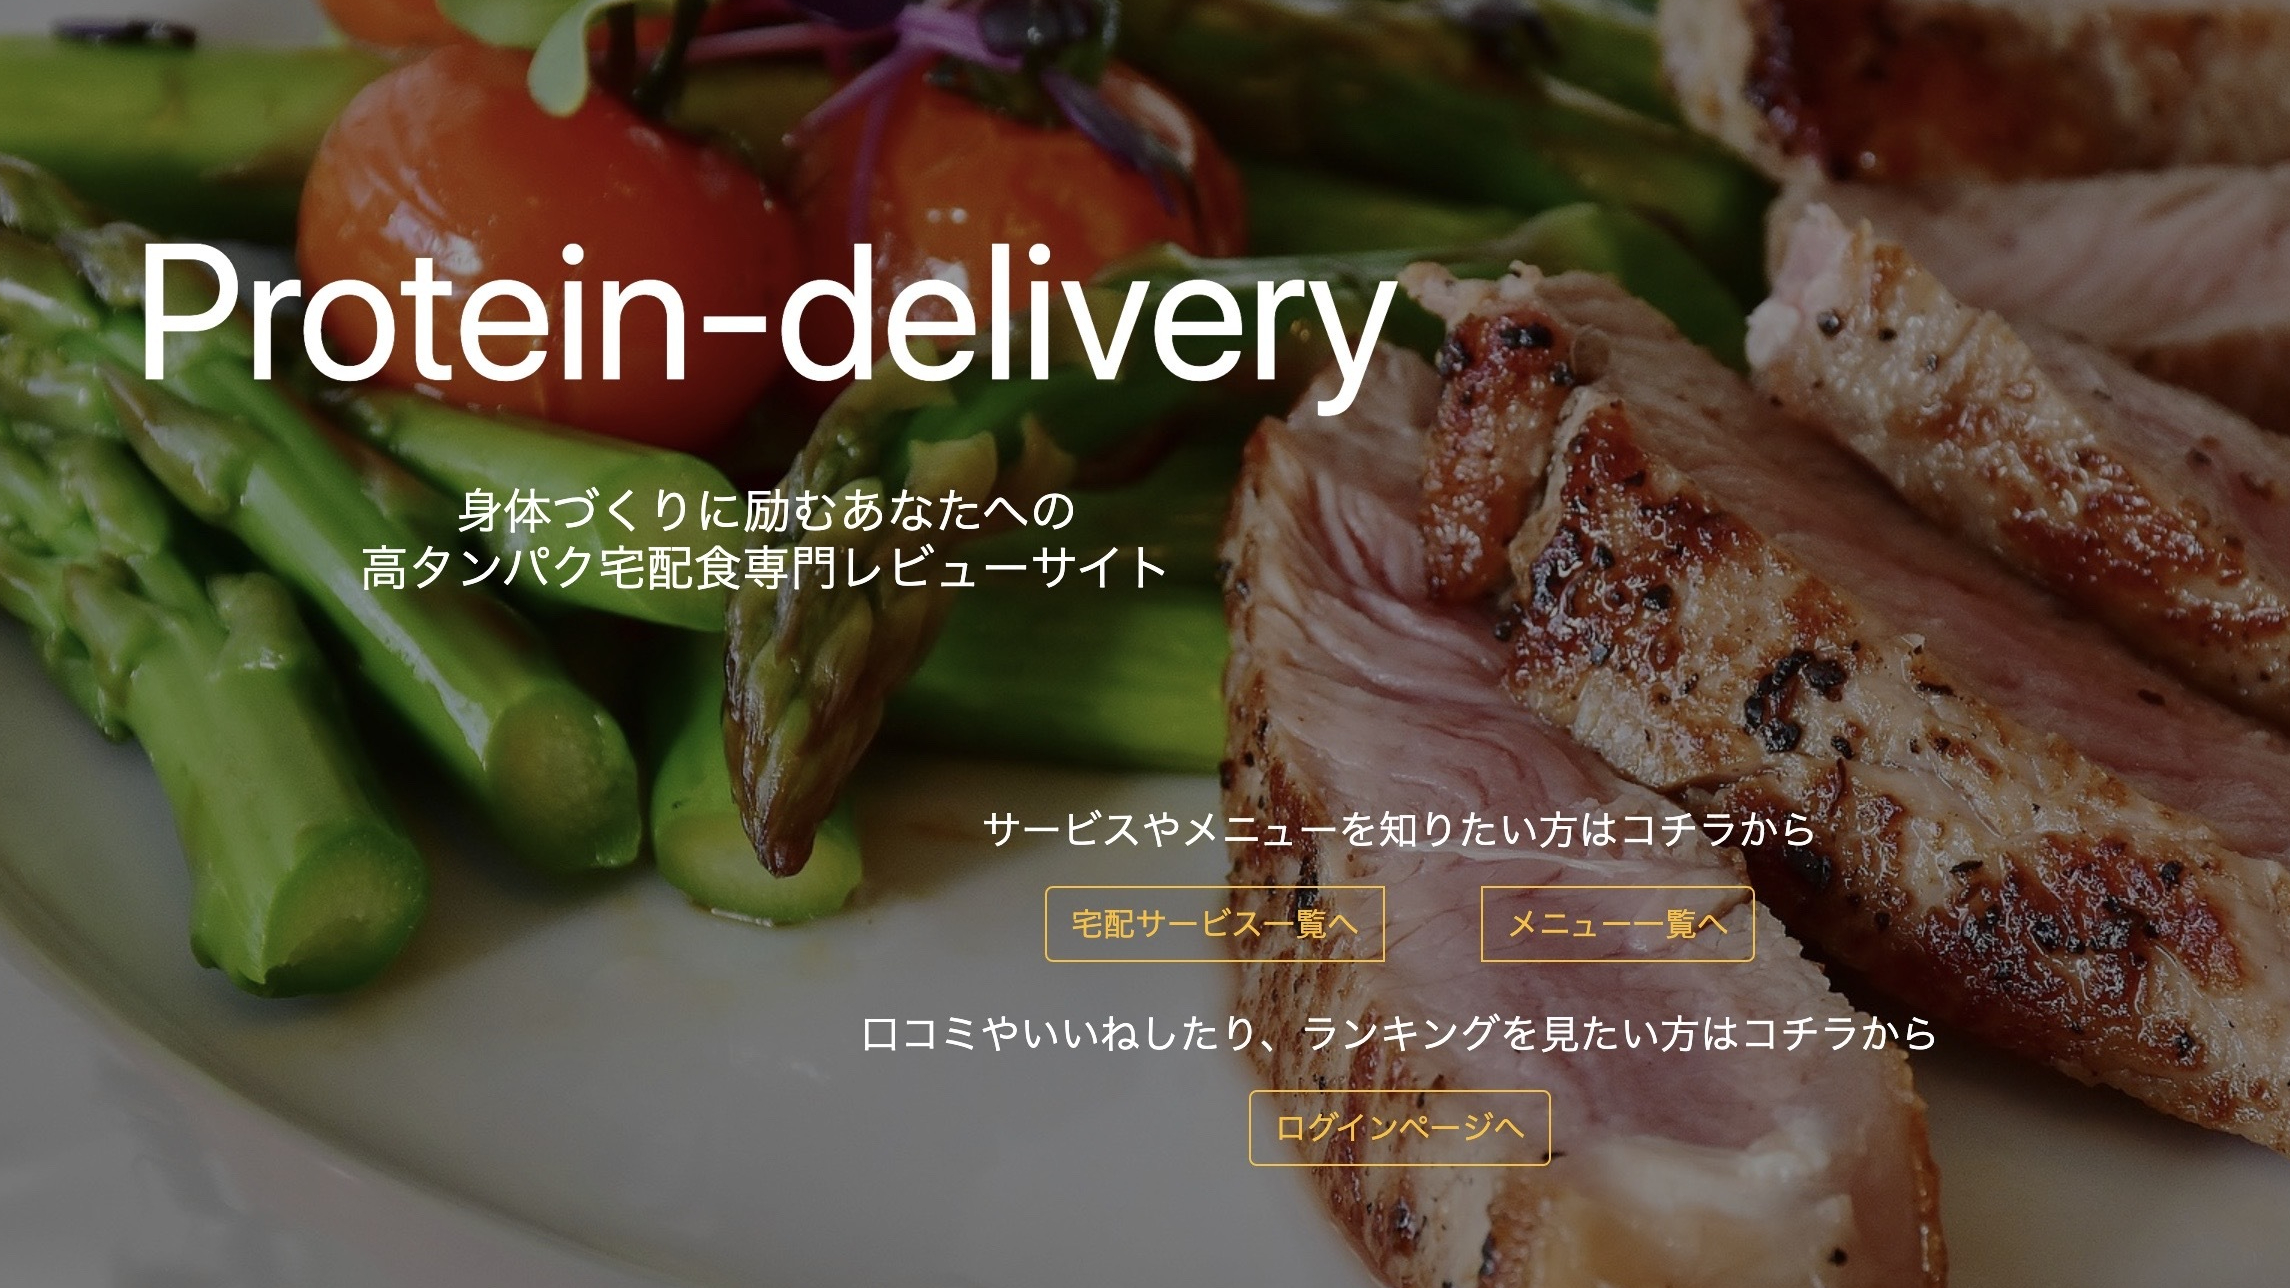 Protein-delivery